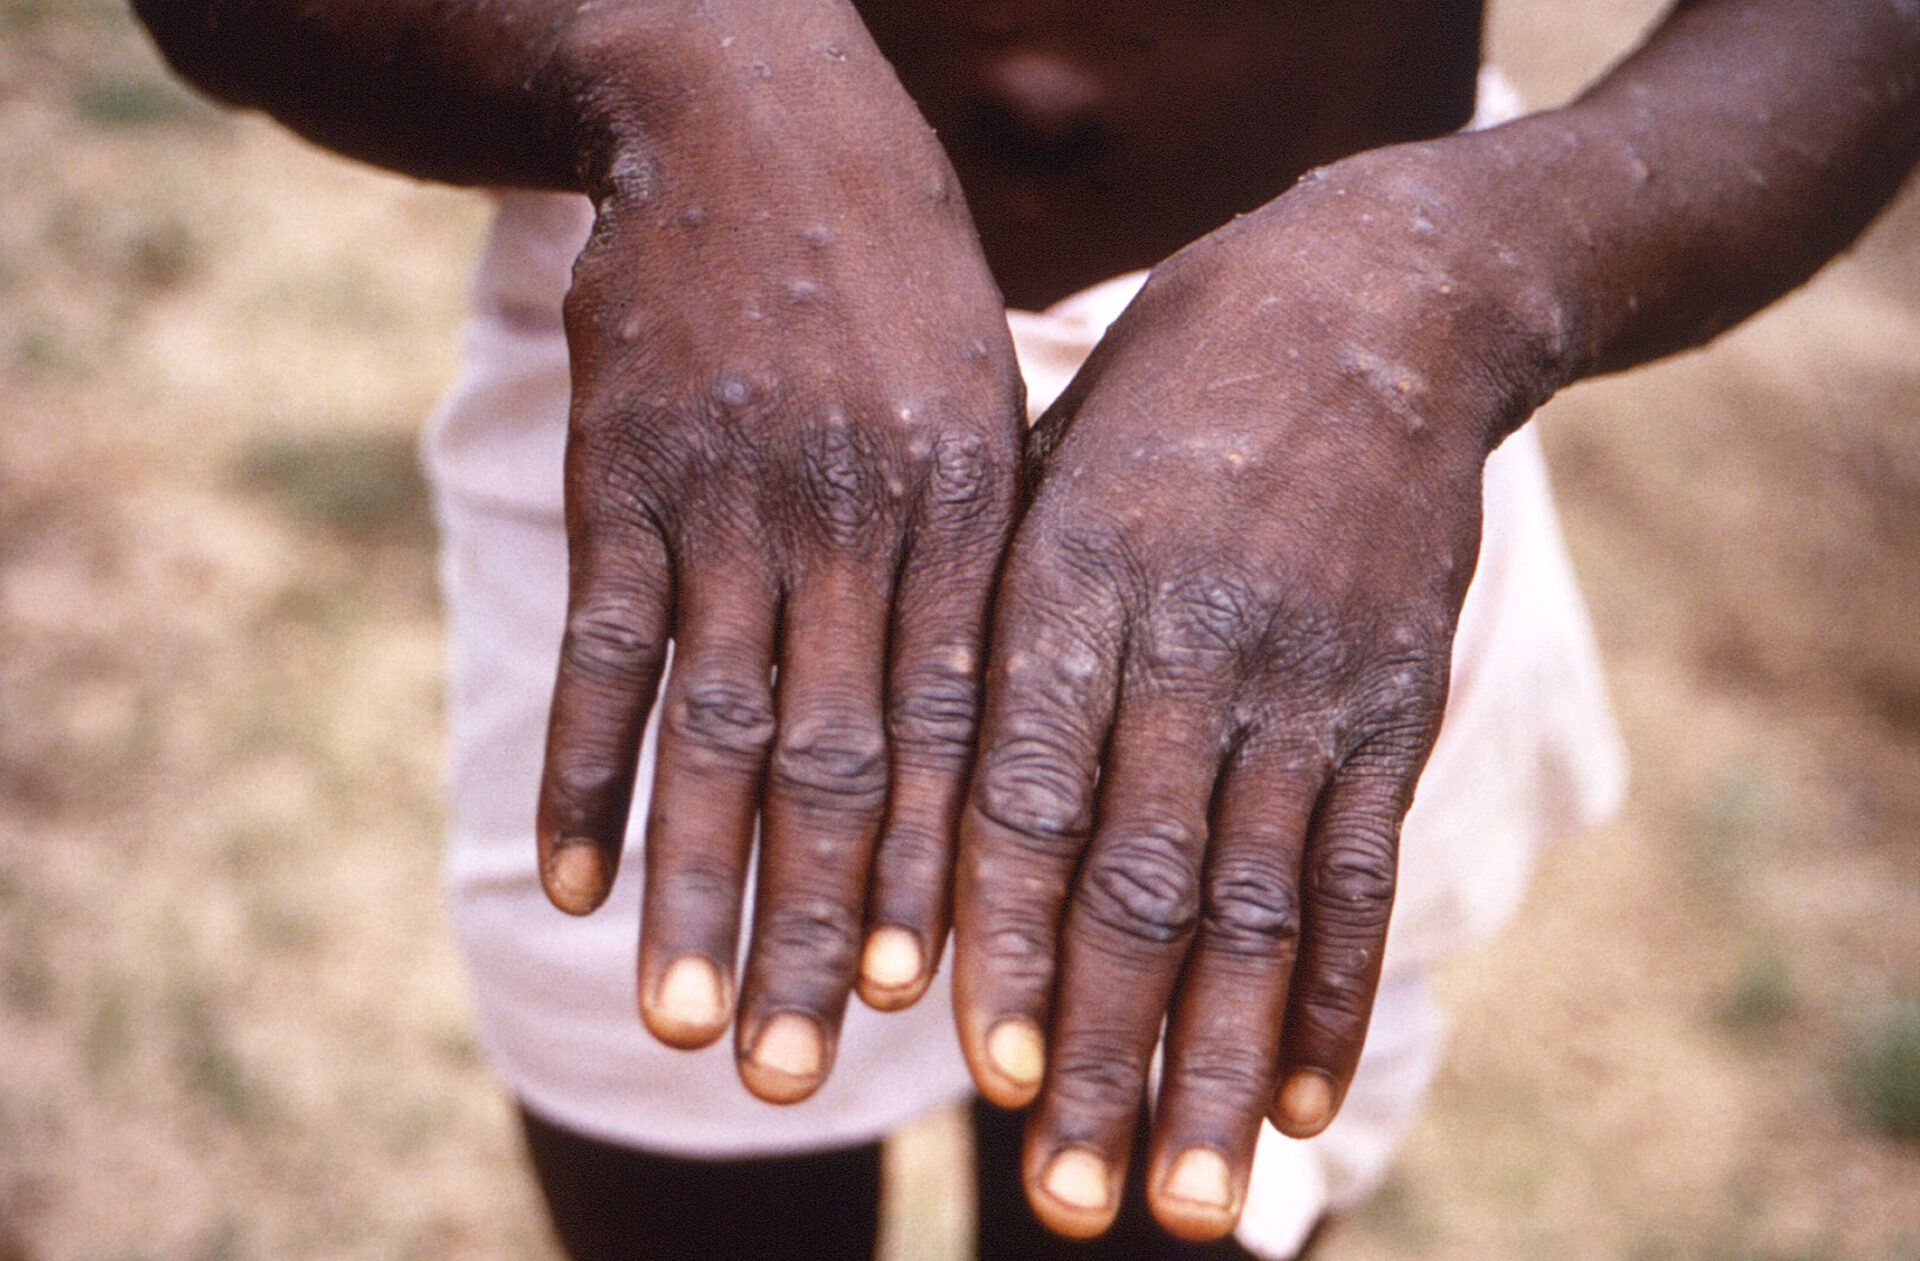 This 1997 image was created during an investigation into an outbreak of mpox, which took place in the Democratic Republic of the Congo (DRC), formerly Zaire, and depicts the dorsal surfaces of the hands of a mpox case patient, who was displaying the appearance of the characteristic rash during its recuperative stage. Even in its stages of healing, note how similar this rash appears to be when compared to the recuperative rash of smallpox, also an Orthopoxvirus.